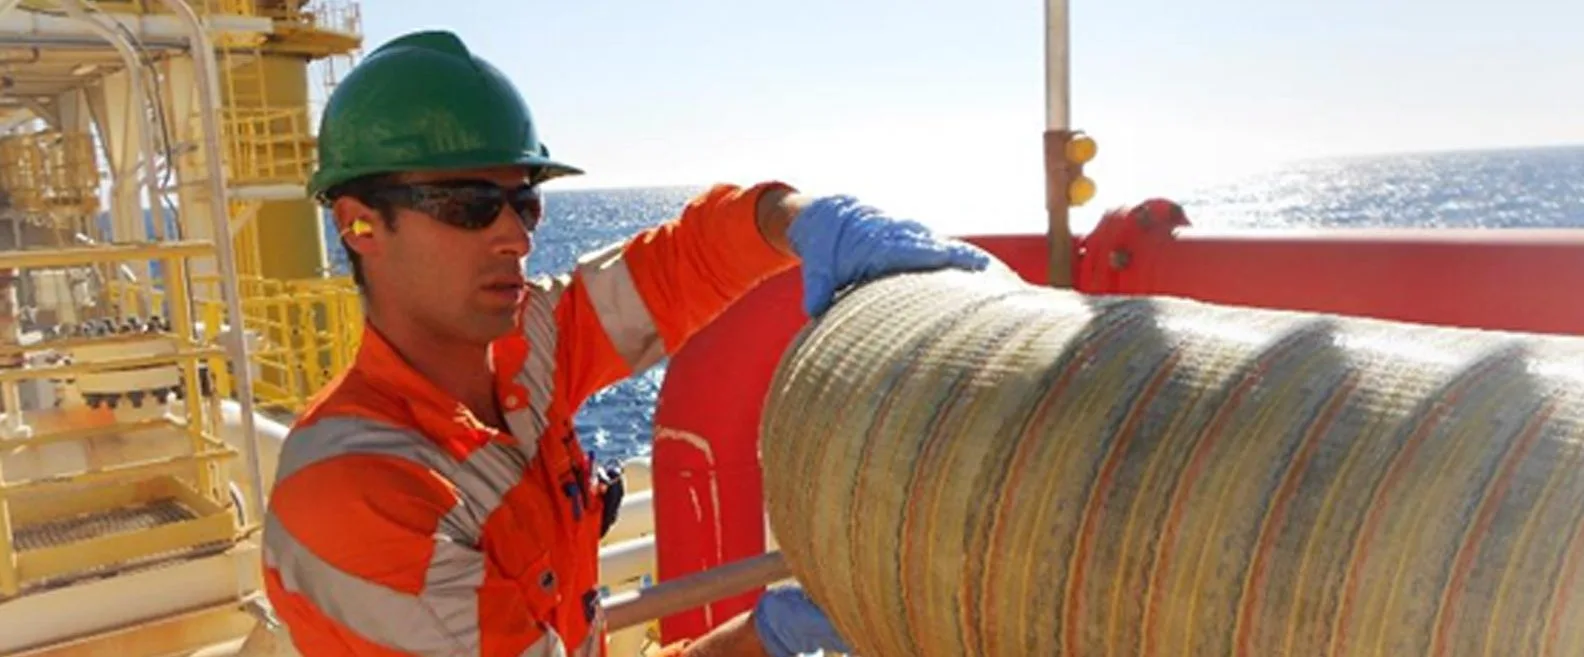 Technician applying composite wrap to pipe offshore in sunshine